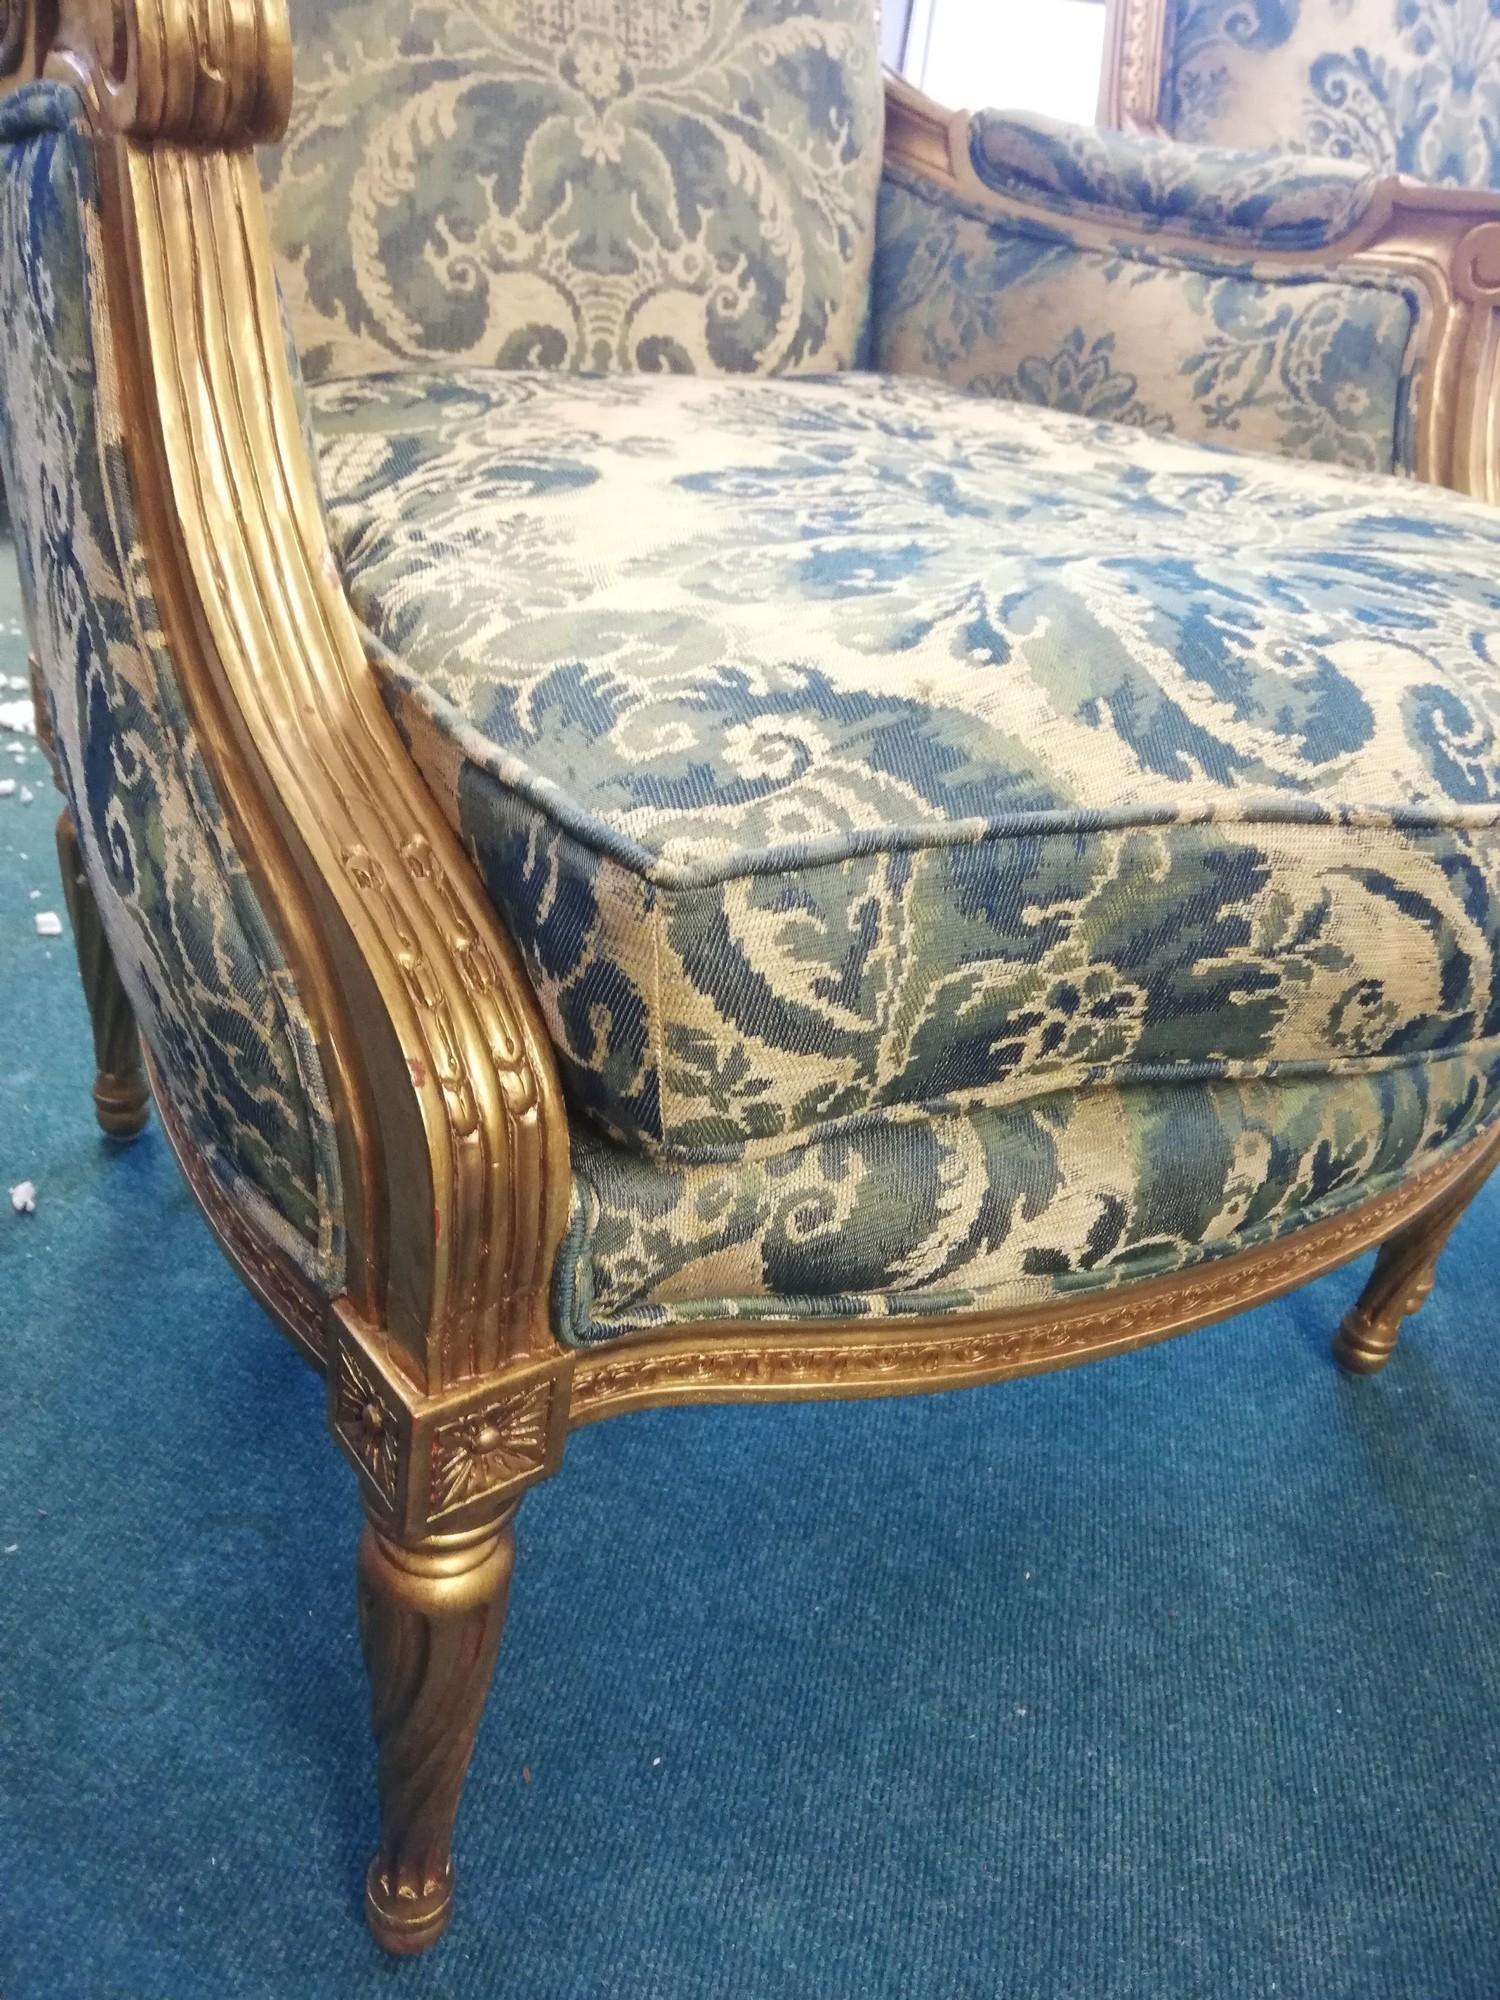 Pair of Brights of nettlebed gilt wood french armchairs with blue silk brocade upholstery - Image 2 of 2